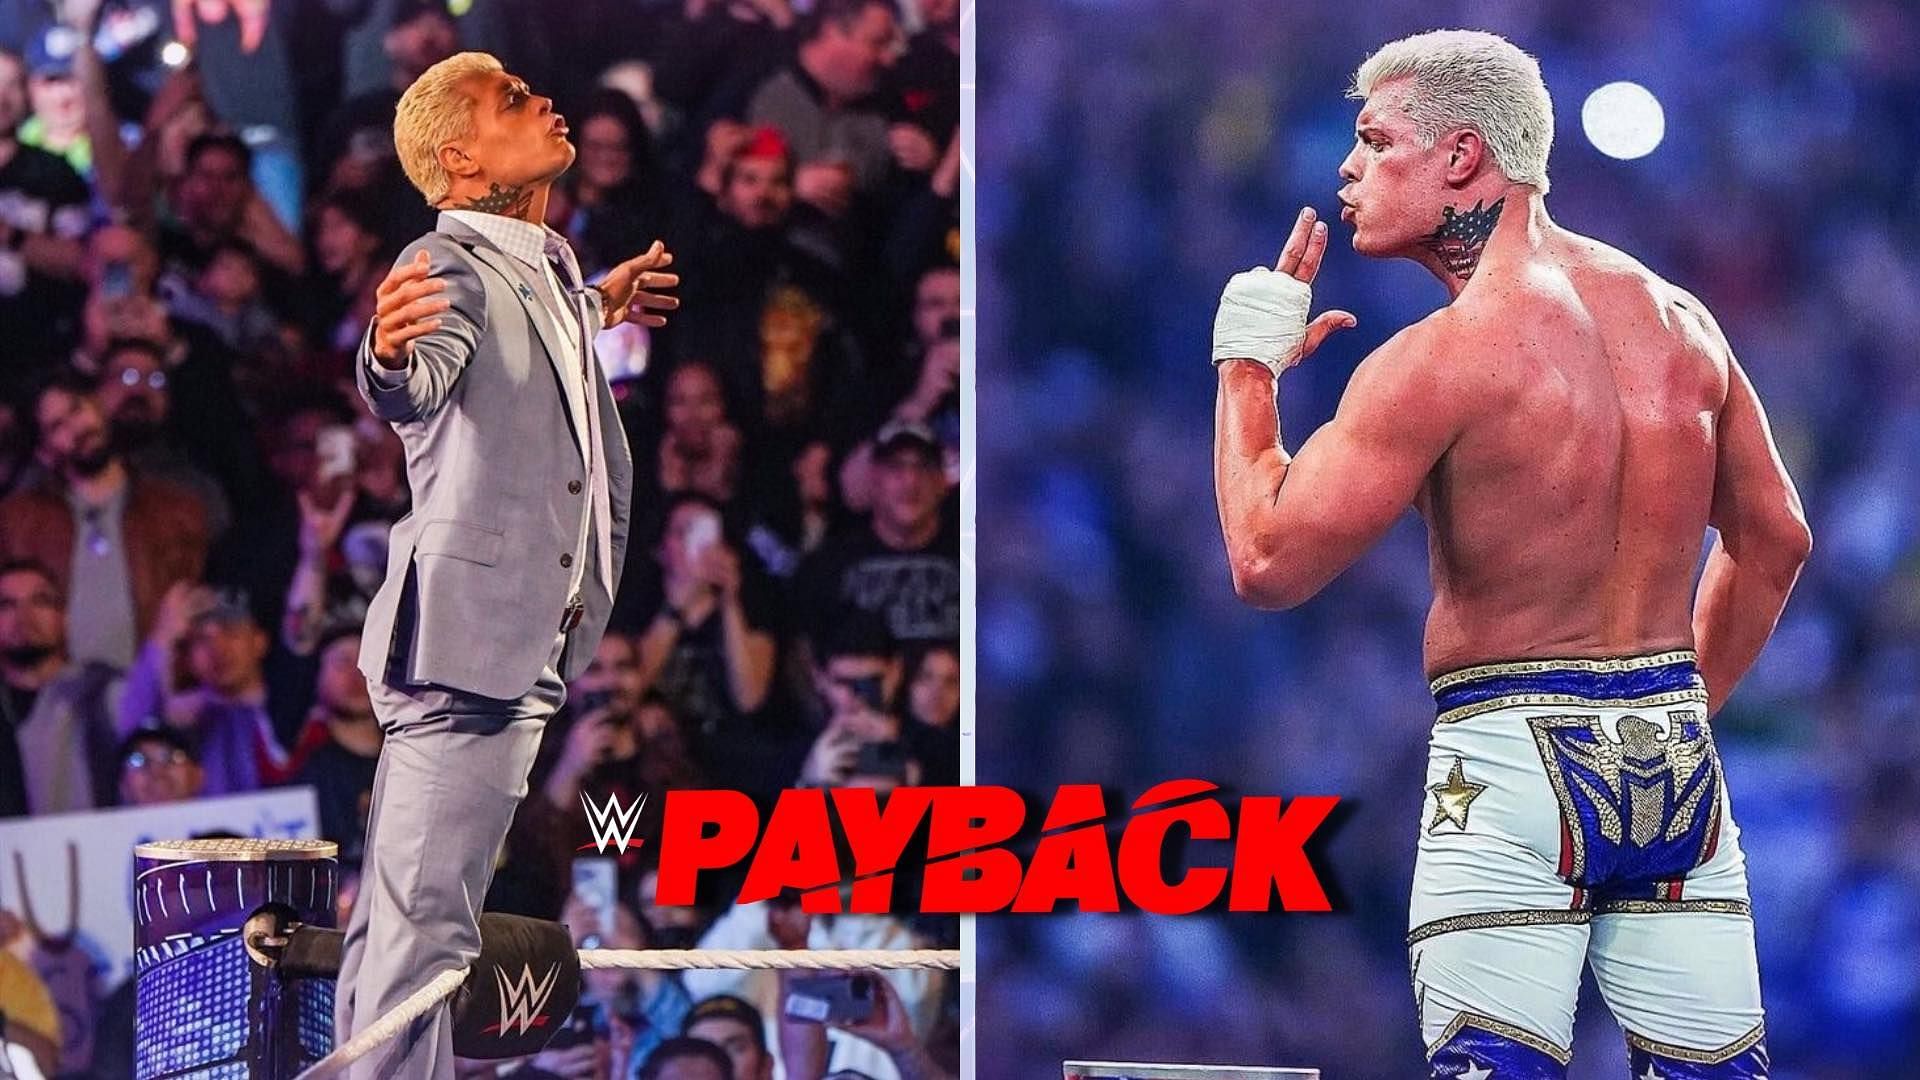 Cody Rhodes has been announced for WWE Payback 2023